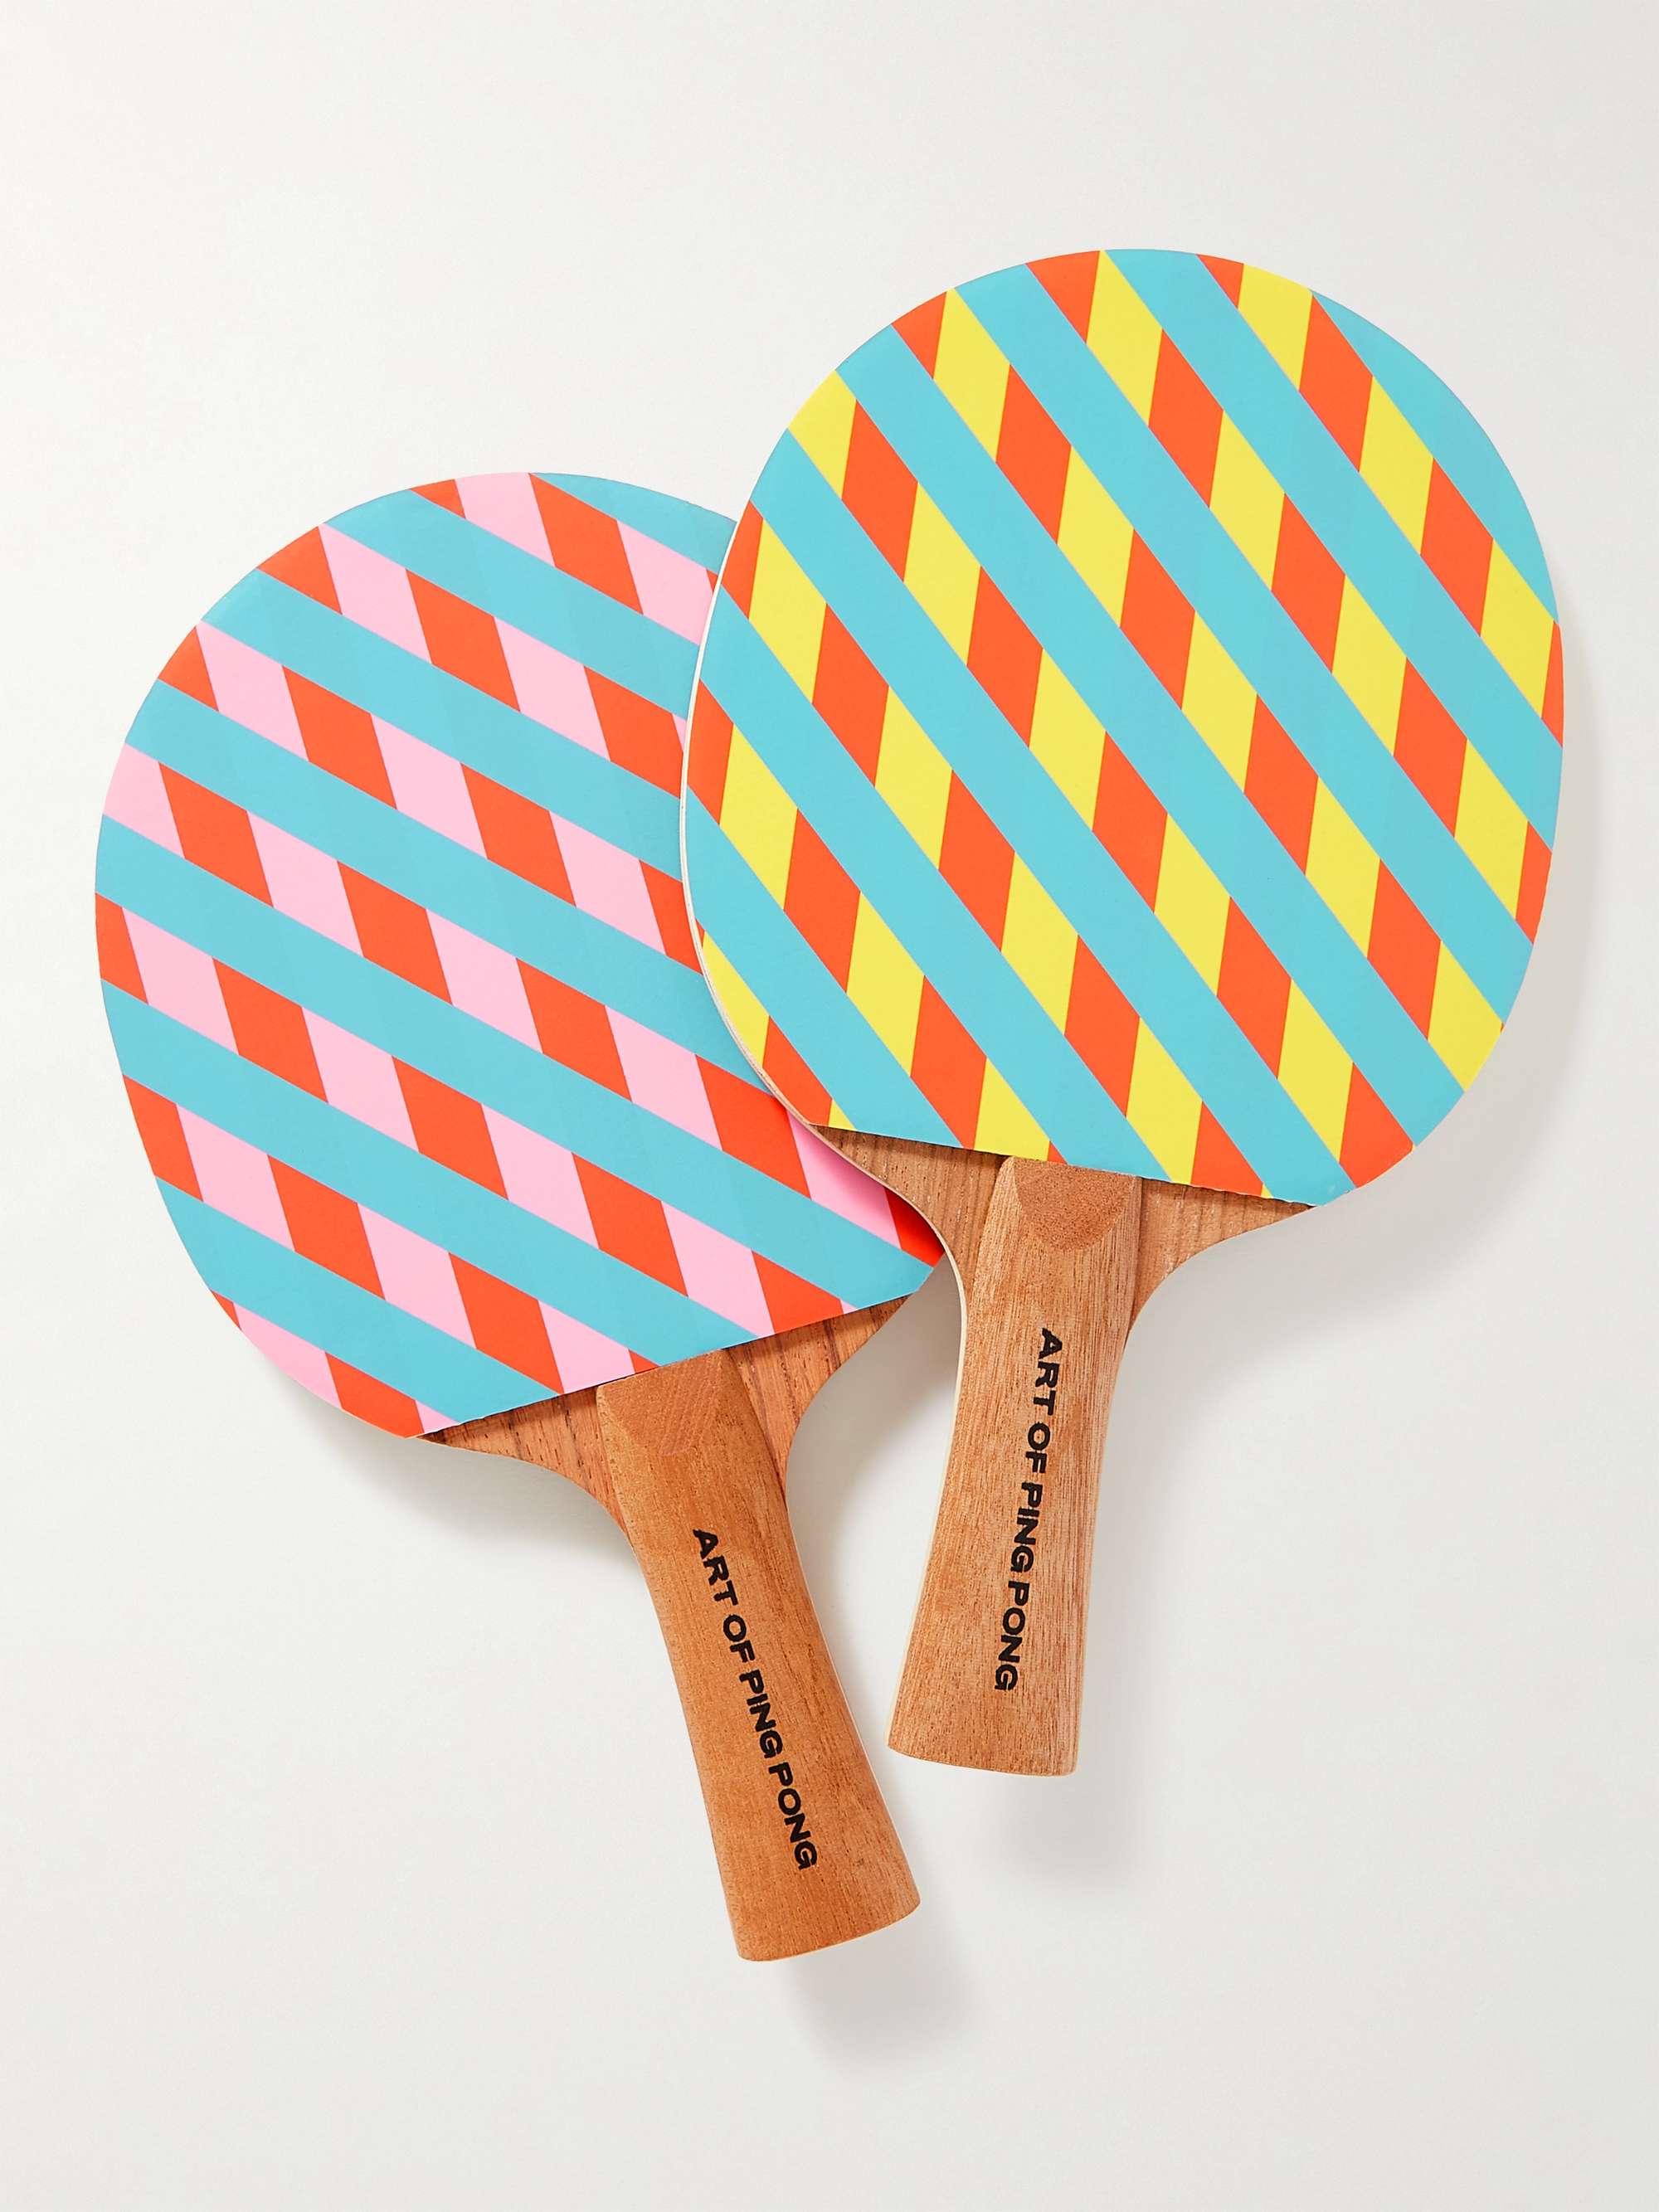 THE ART OF PING PONG Set of Two ArtBats